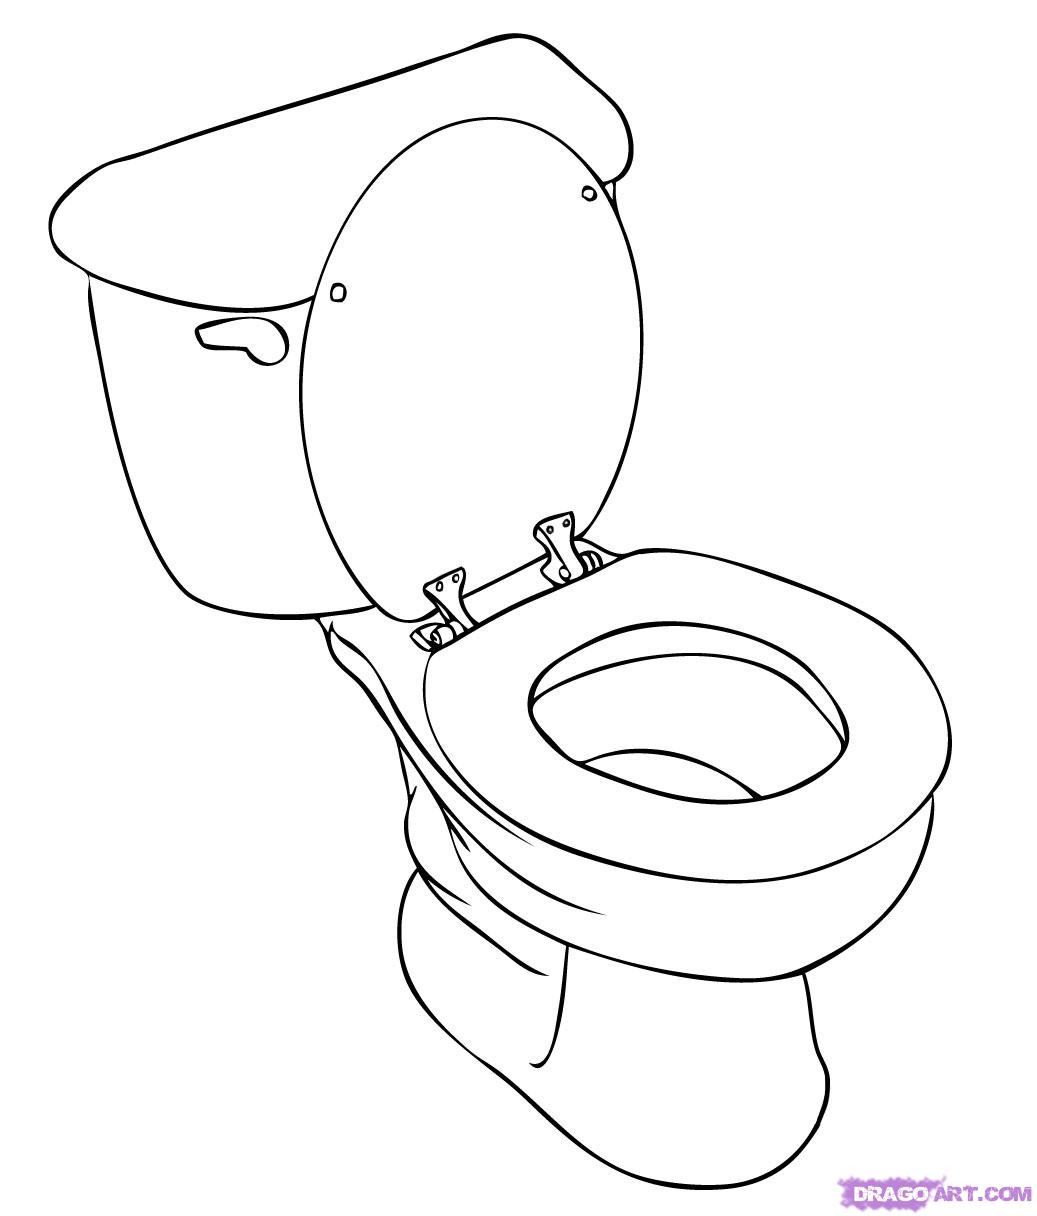 Cartoon Toilet Colouring Pages